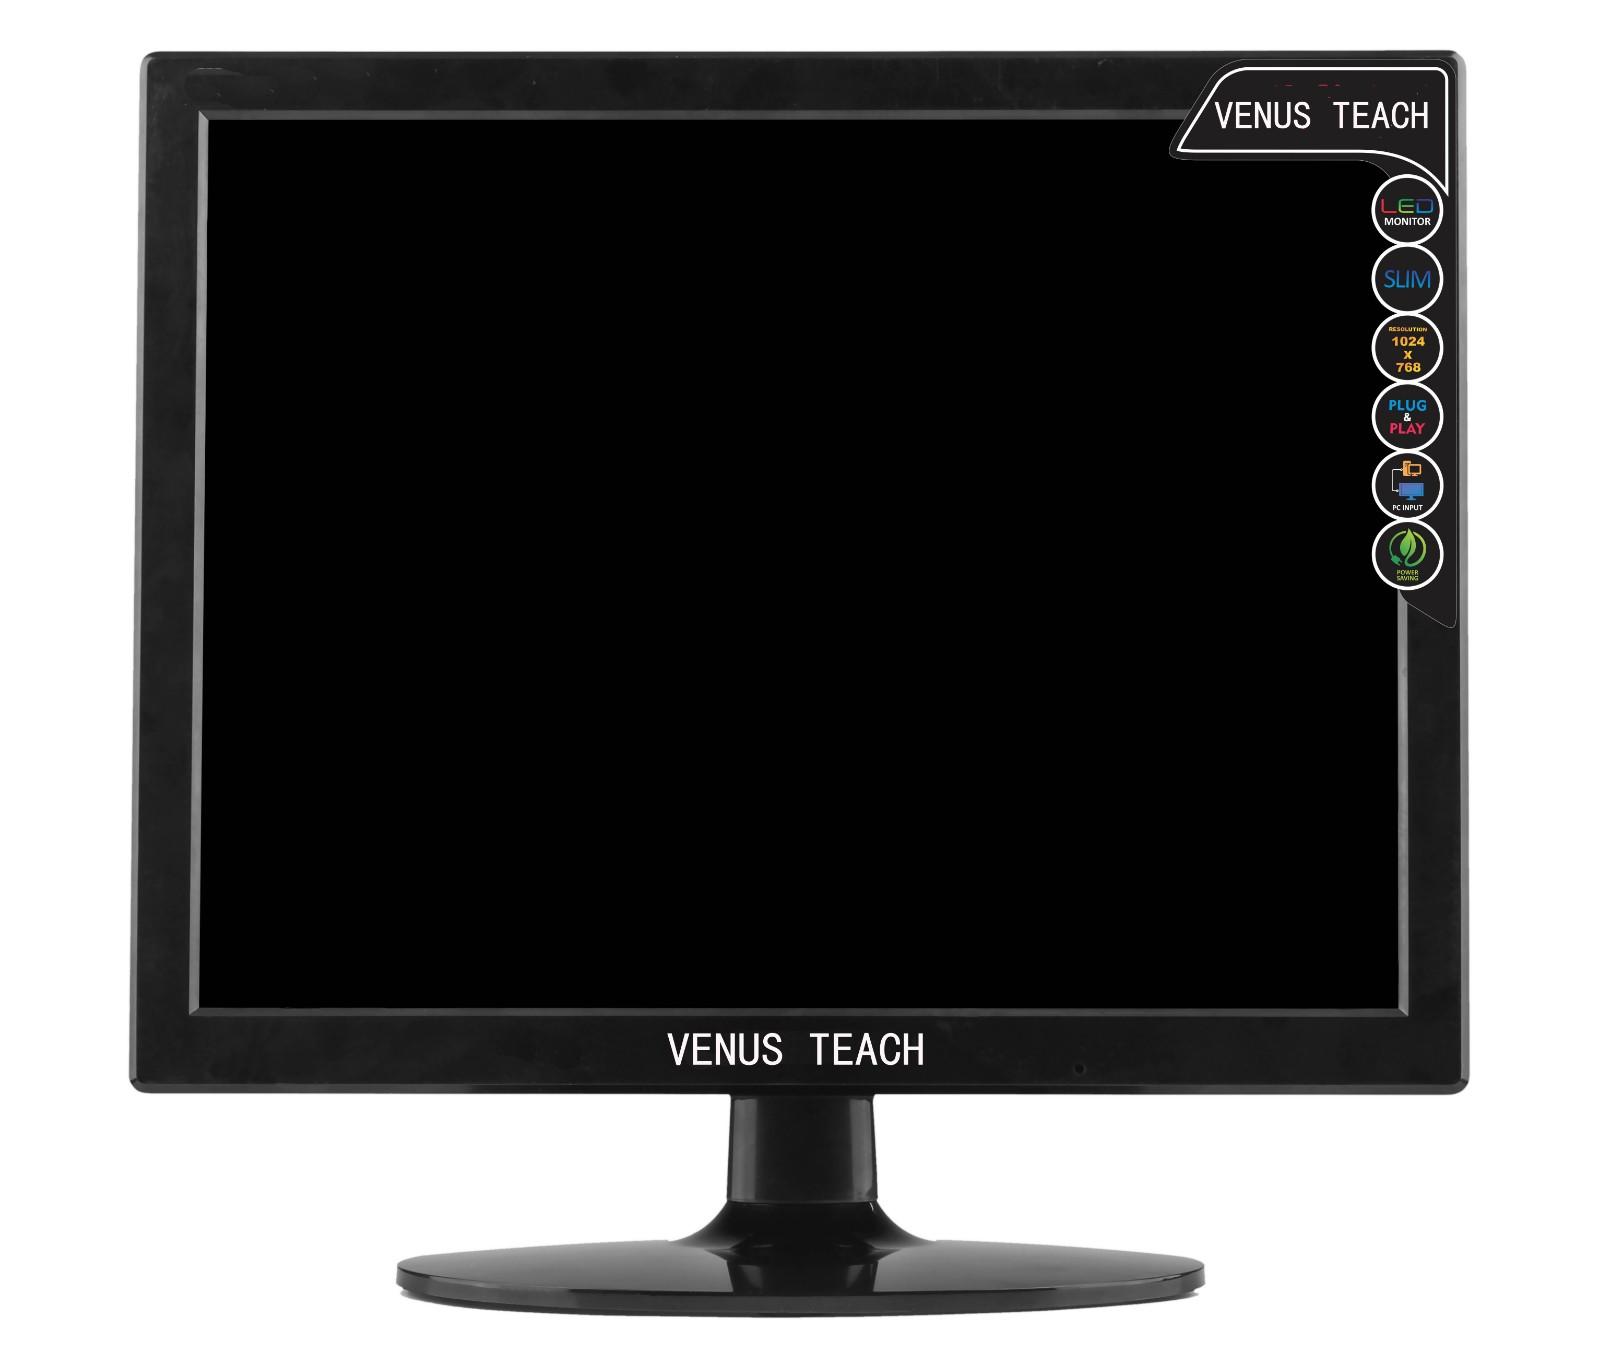 Xinyao LCD monitor 15 lcd with hdmi output for lcd tv screen-3